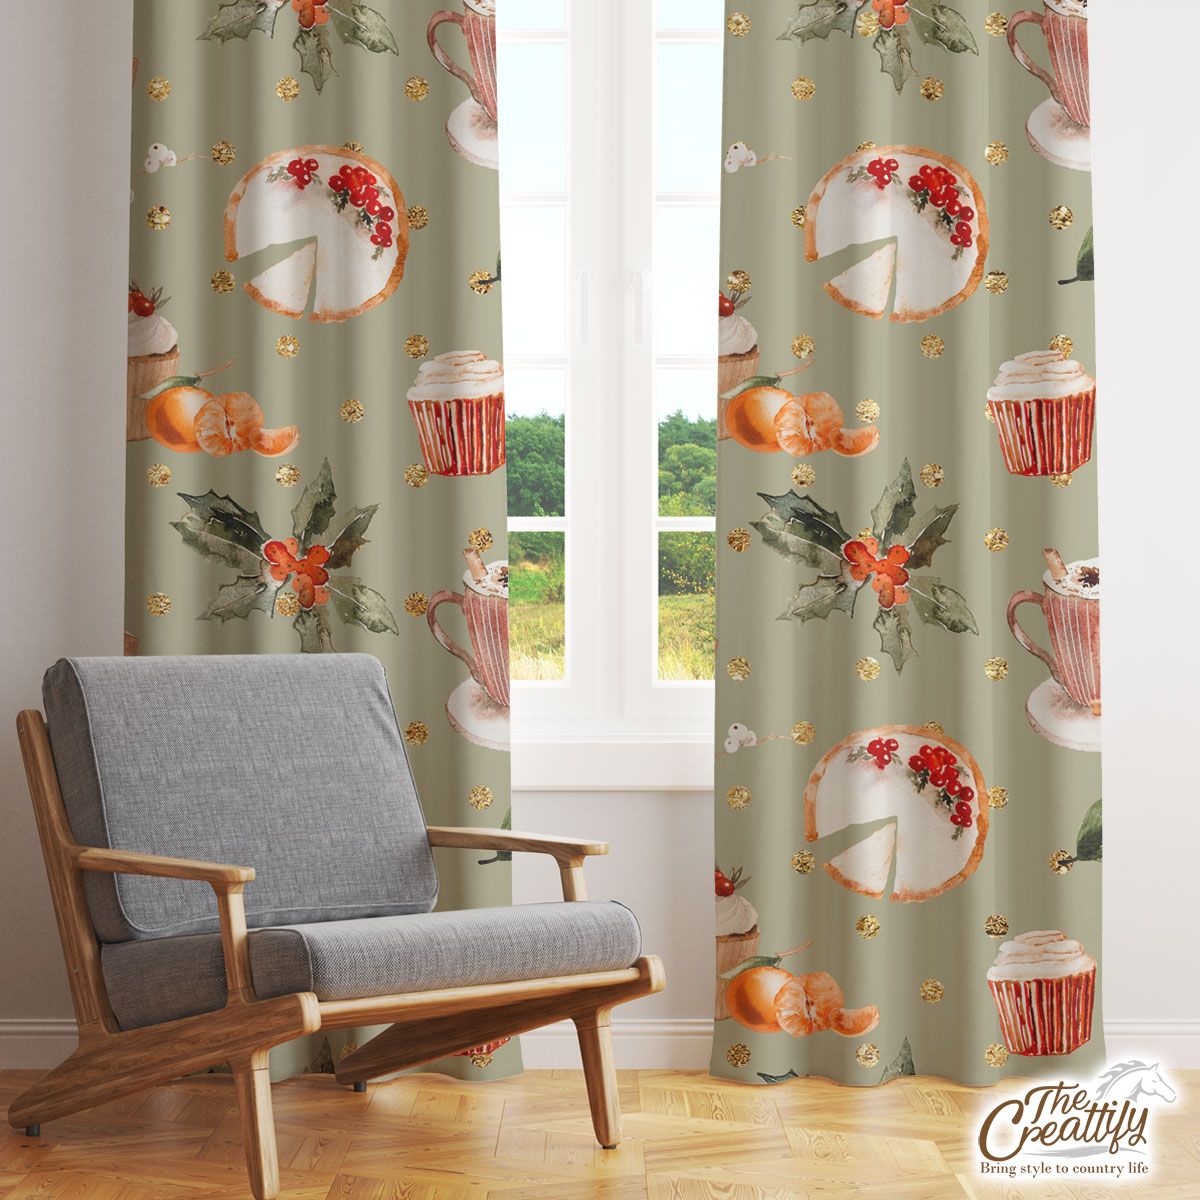 Christmas Cupcakes, Hot Cocoa, Cinnamon, Orange And Holly Leaves Seamless Pattern Window Curtain